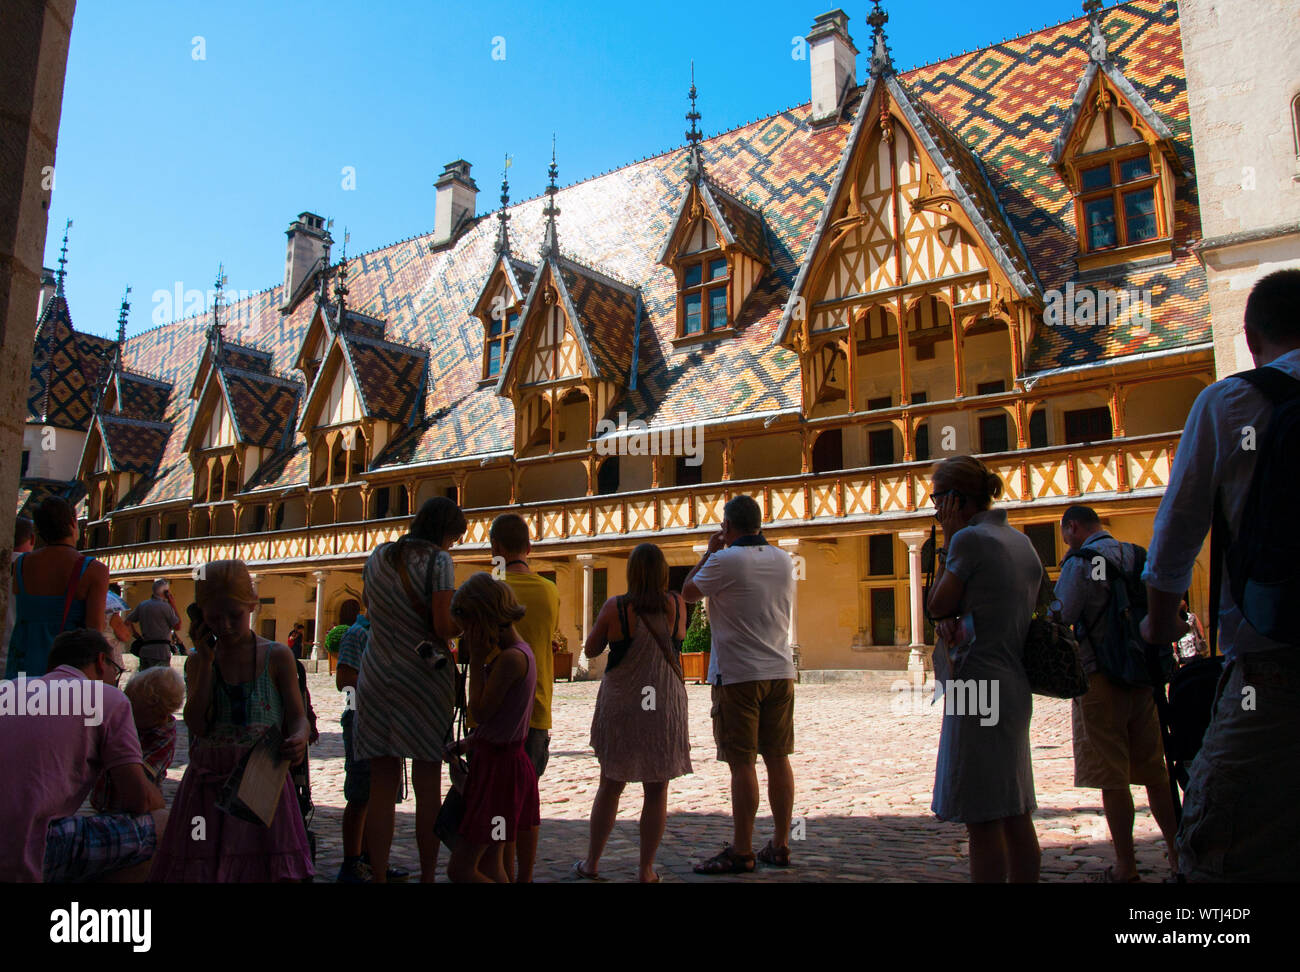 Sightseeing tourists standing in the shadow at the courtyard of the Hospices de Beaune with its beautifully decorated roof. Beaune, Burgundy, France. Stock Photo